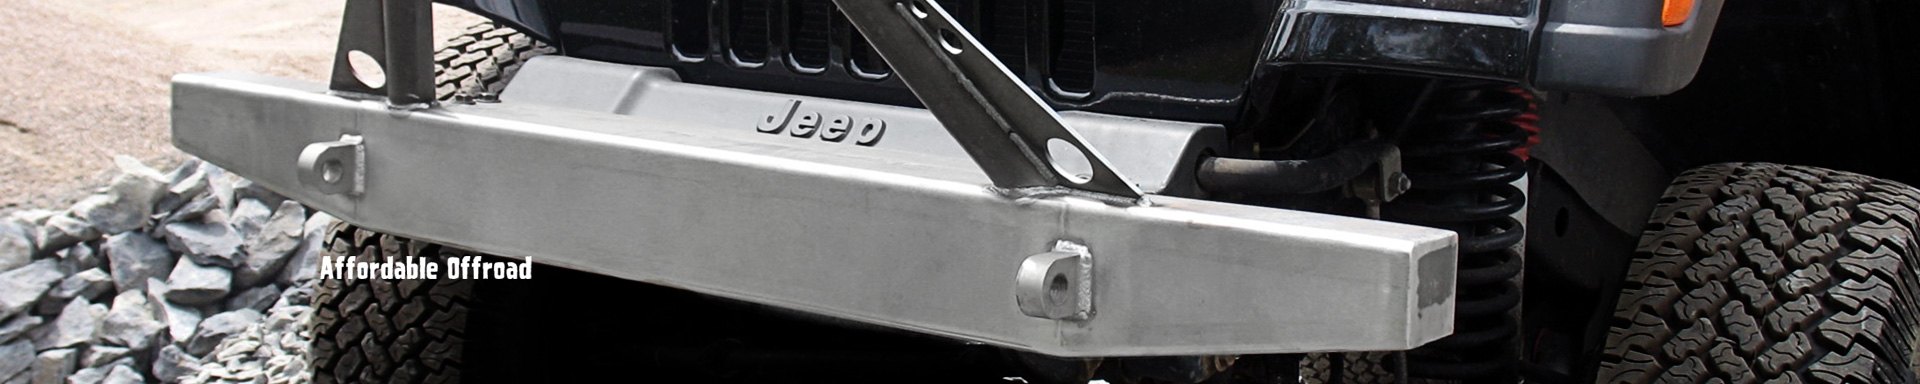 Affordable Offroad Running Boards